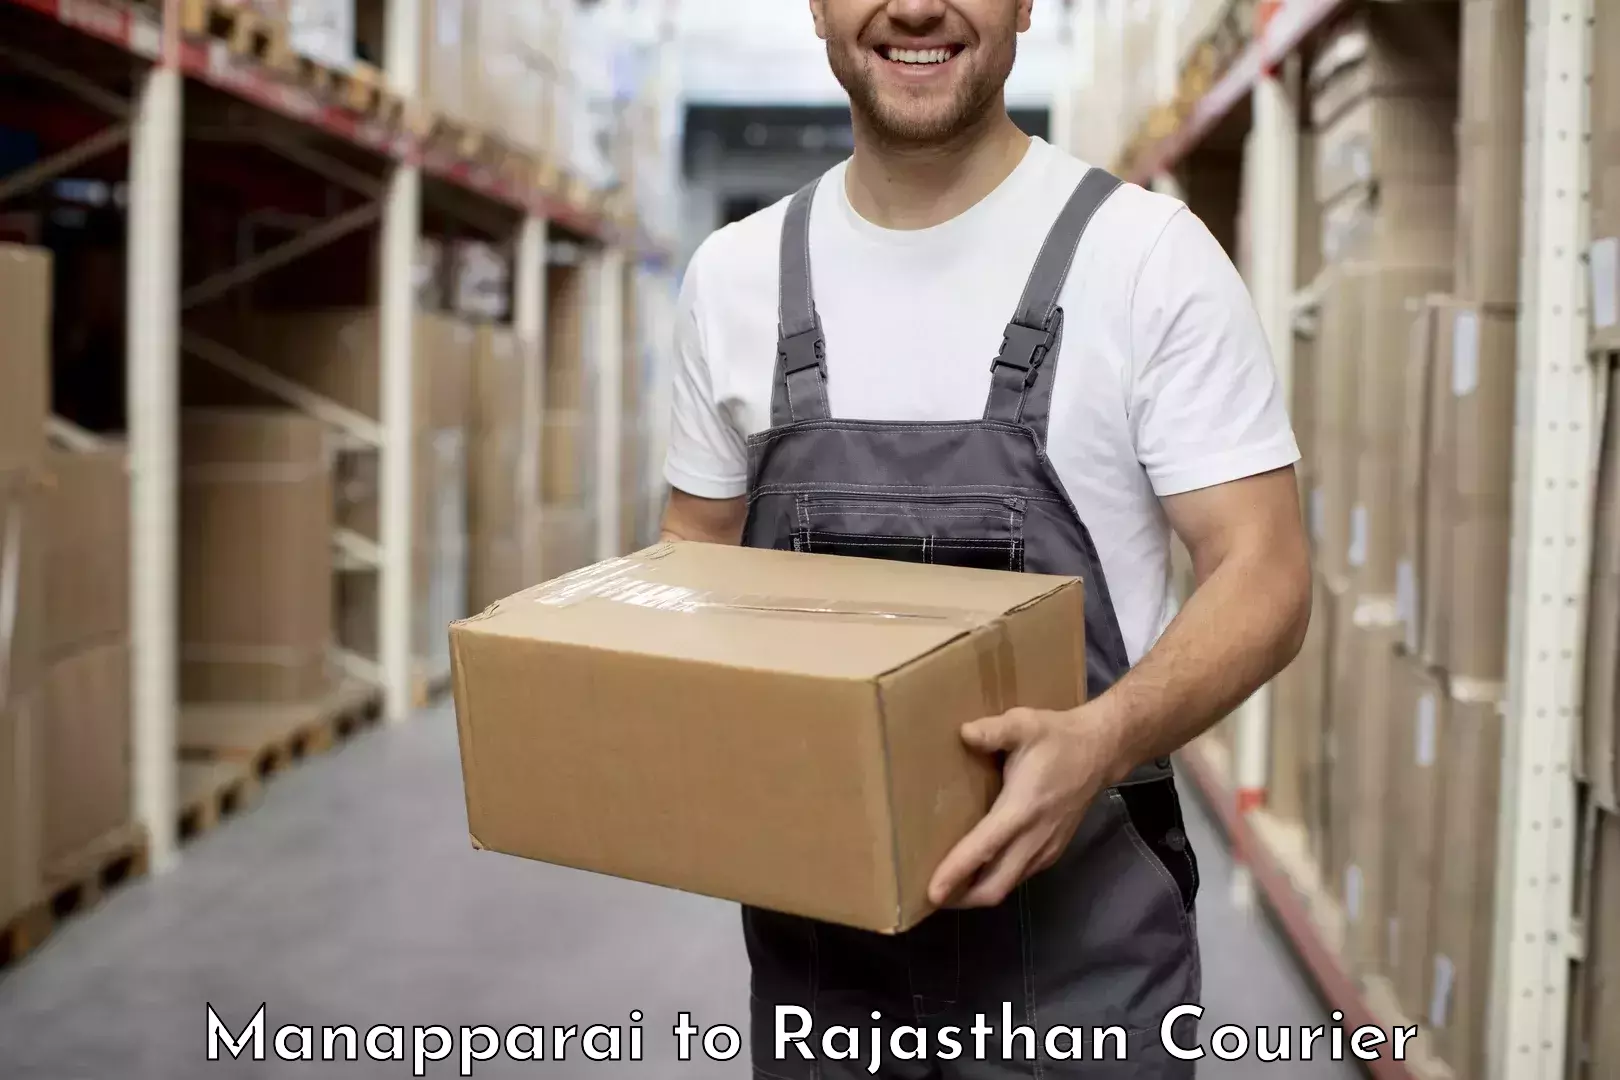 Reliable shipping partners Manapparai to Rajasthan